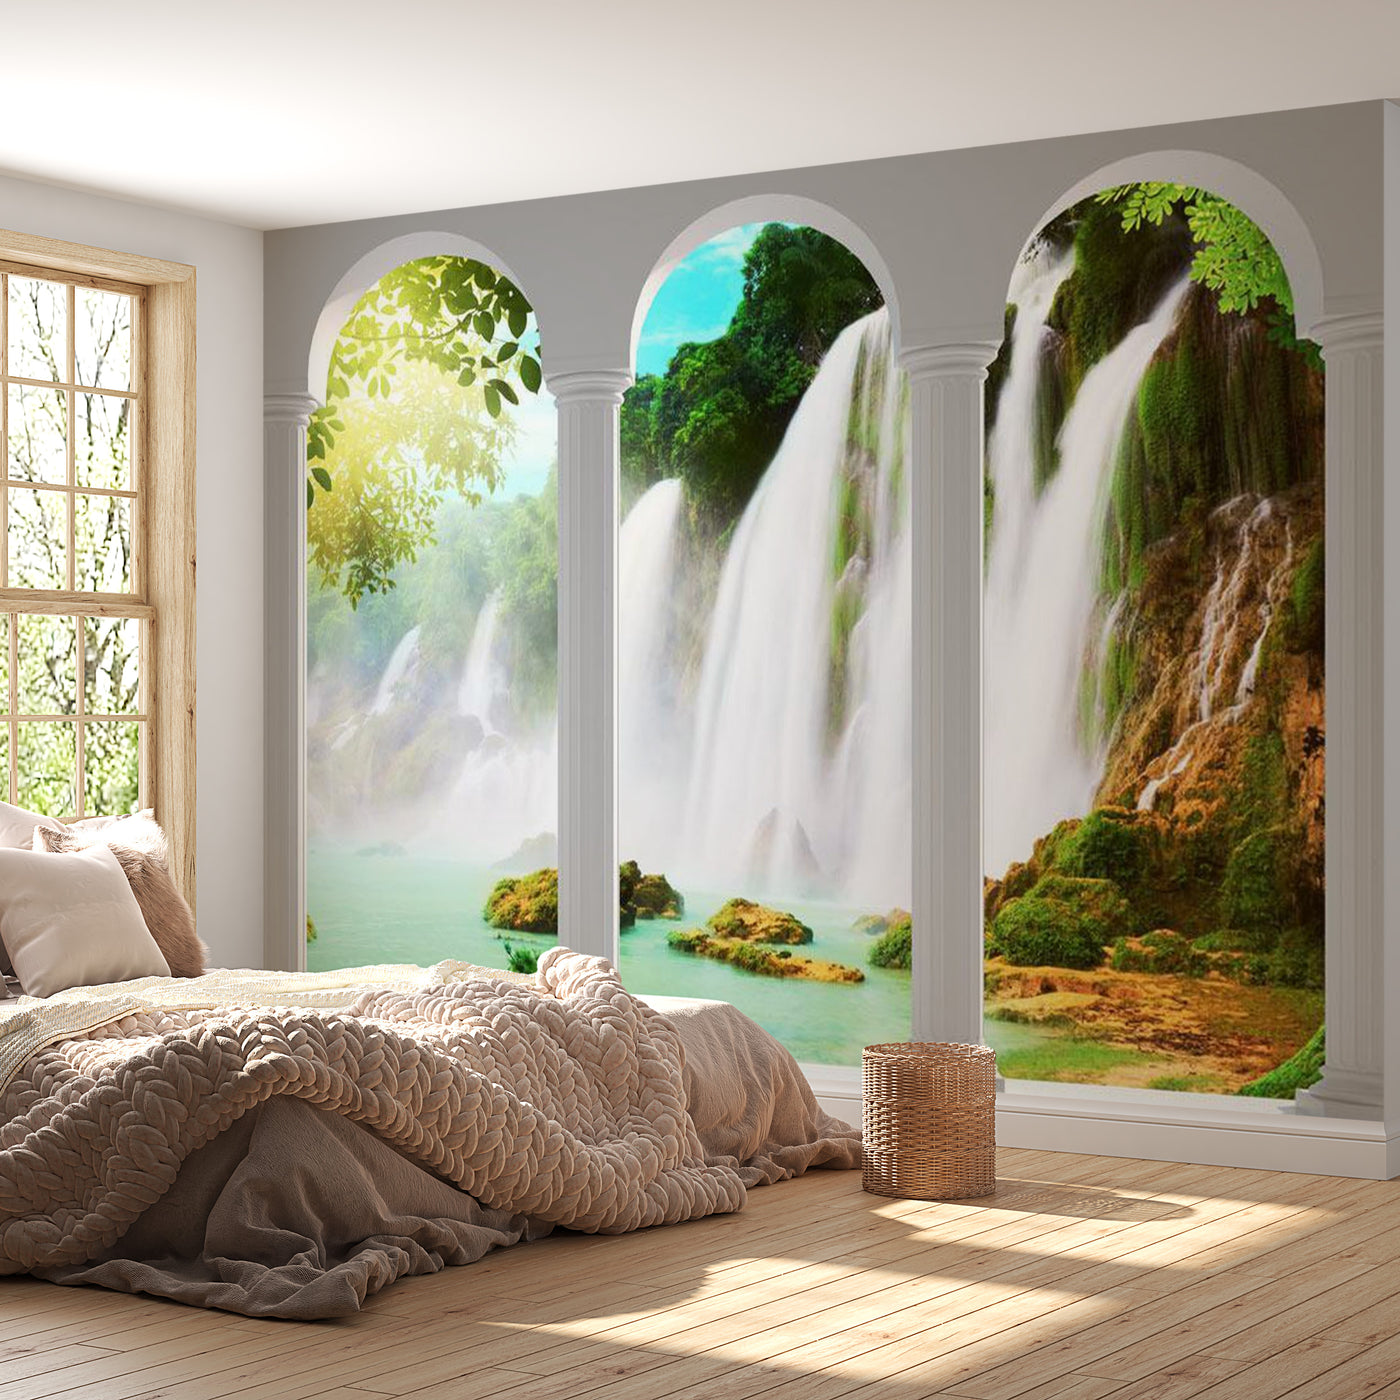 Peel & Stick Nature Wall Mural - Waterfall Beauty - Removable Wall Decals